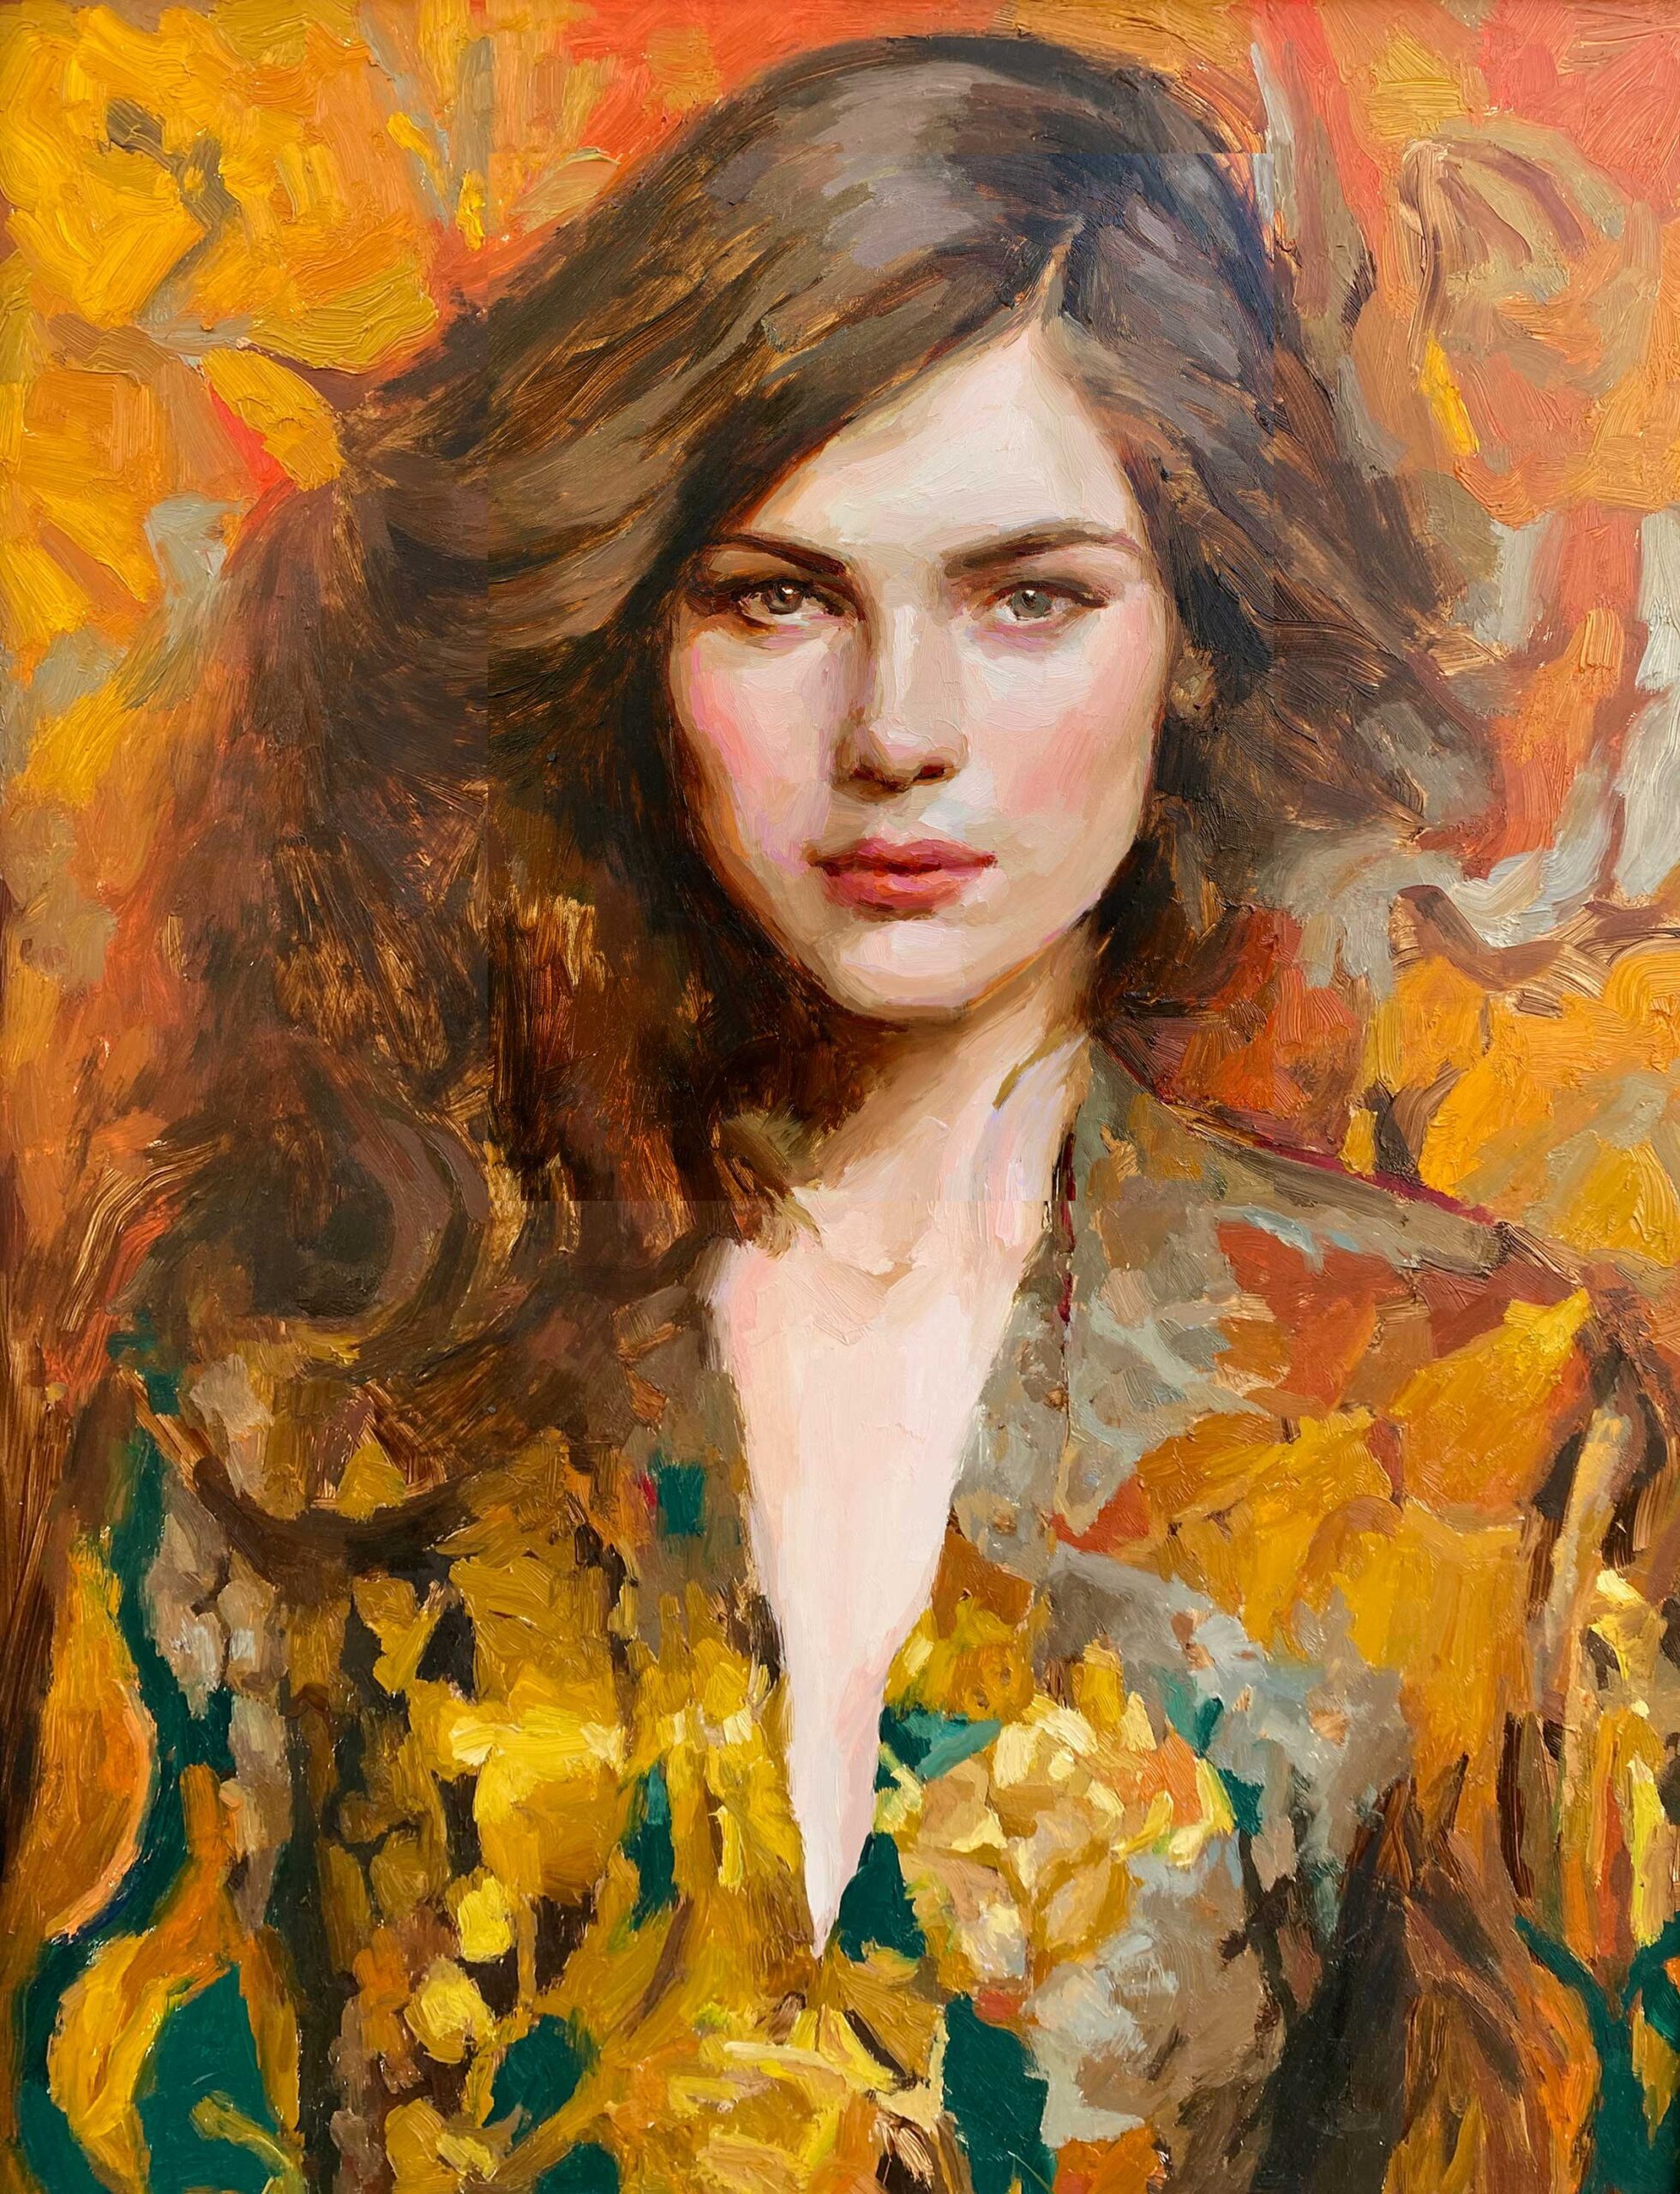 Mary Sauer, "Lady Autumn Embellished in Her Glory," 20 x 16 inches, Oil on Panel, 2023